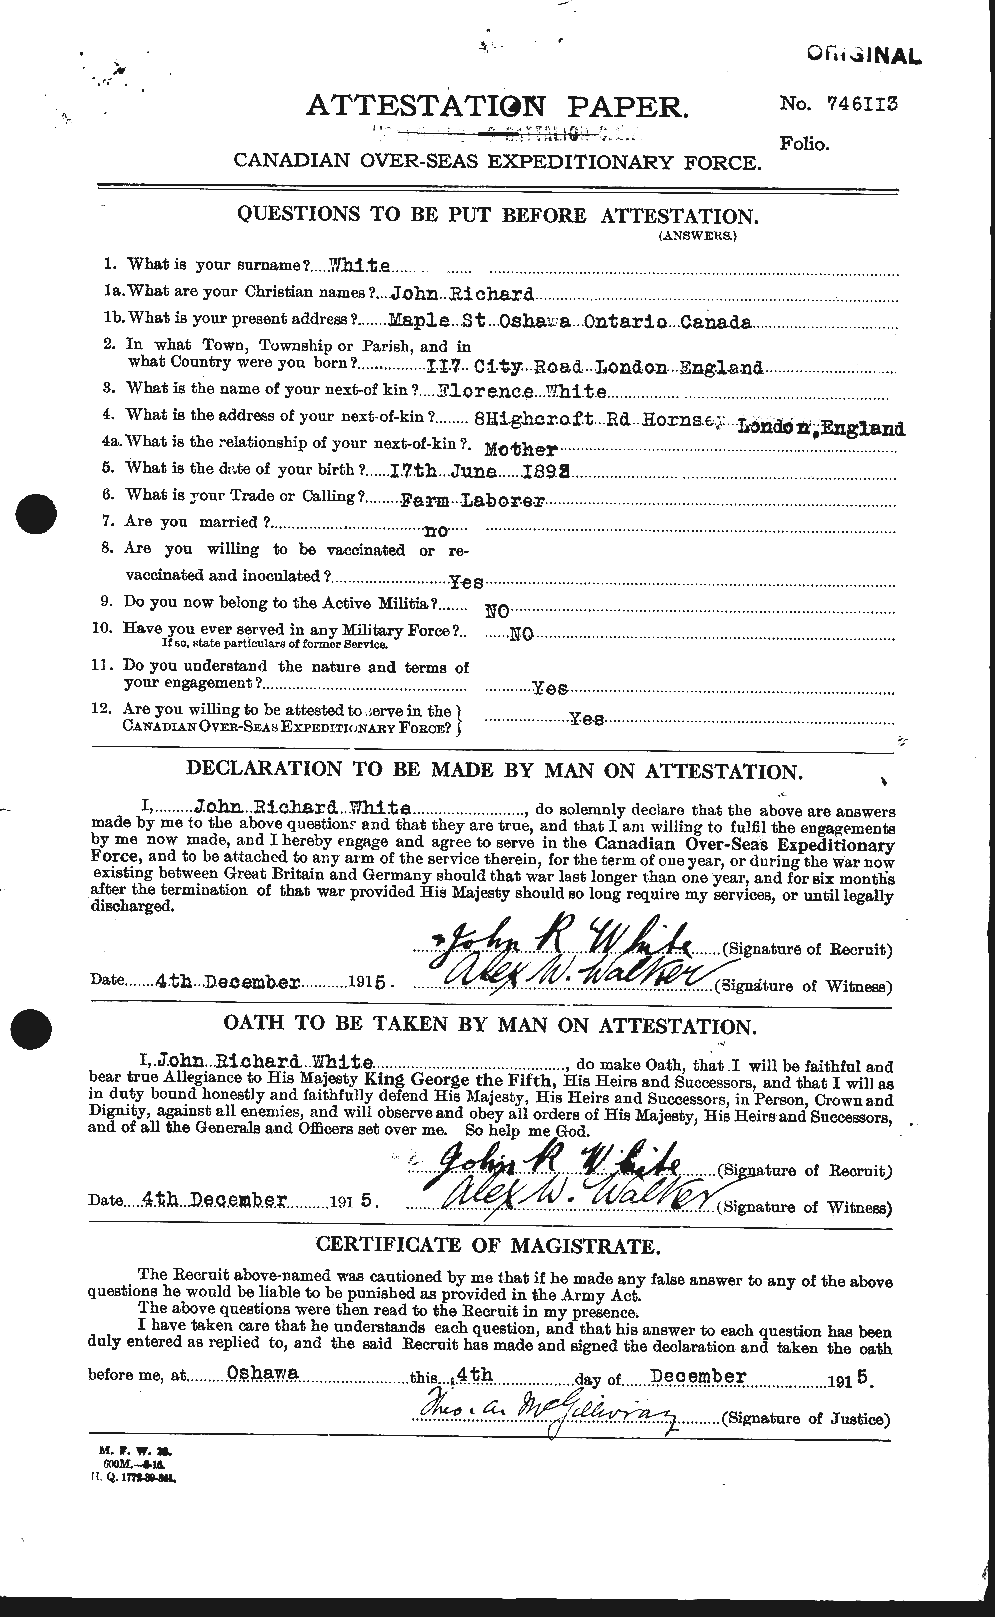 Personnel Records of the First World War - CEF 671592a